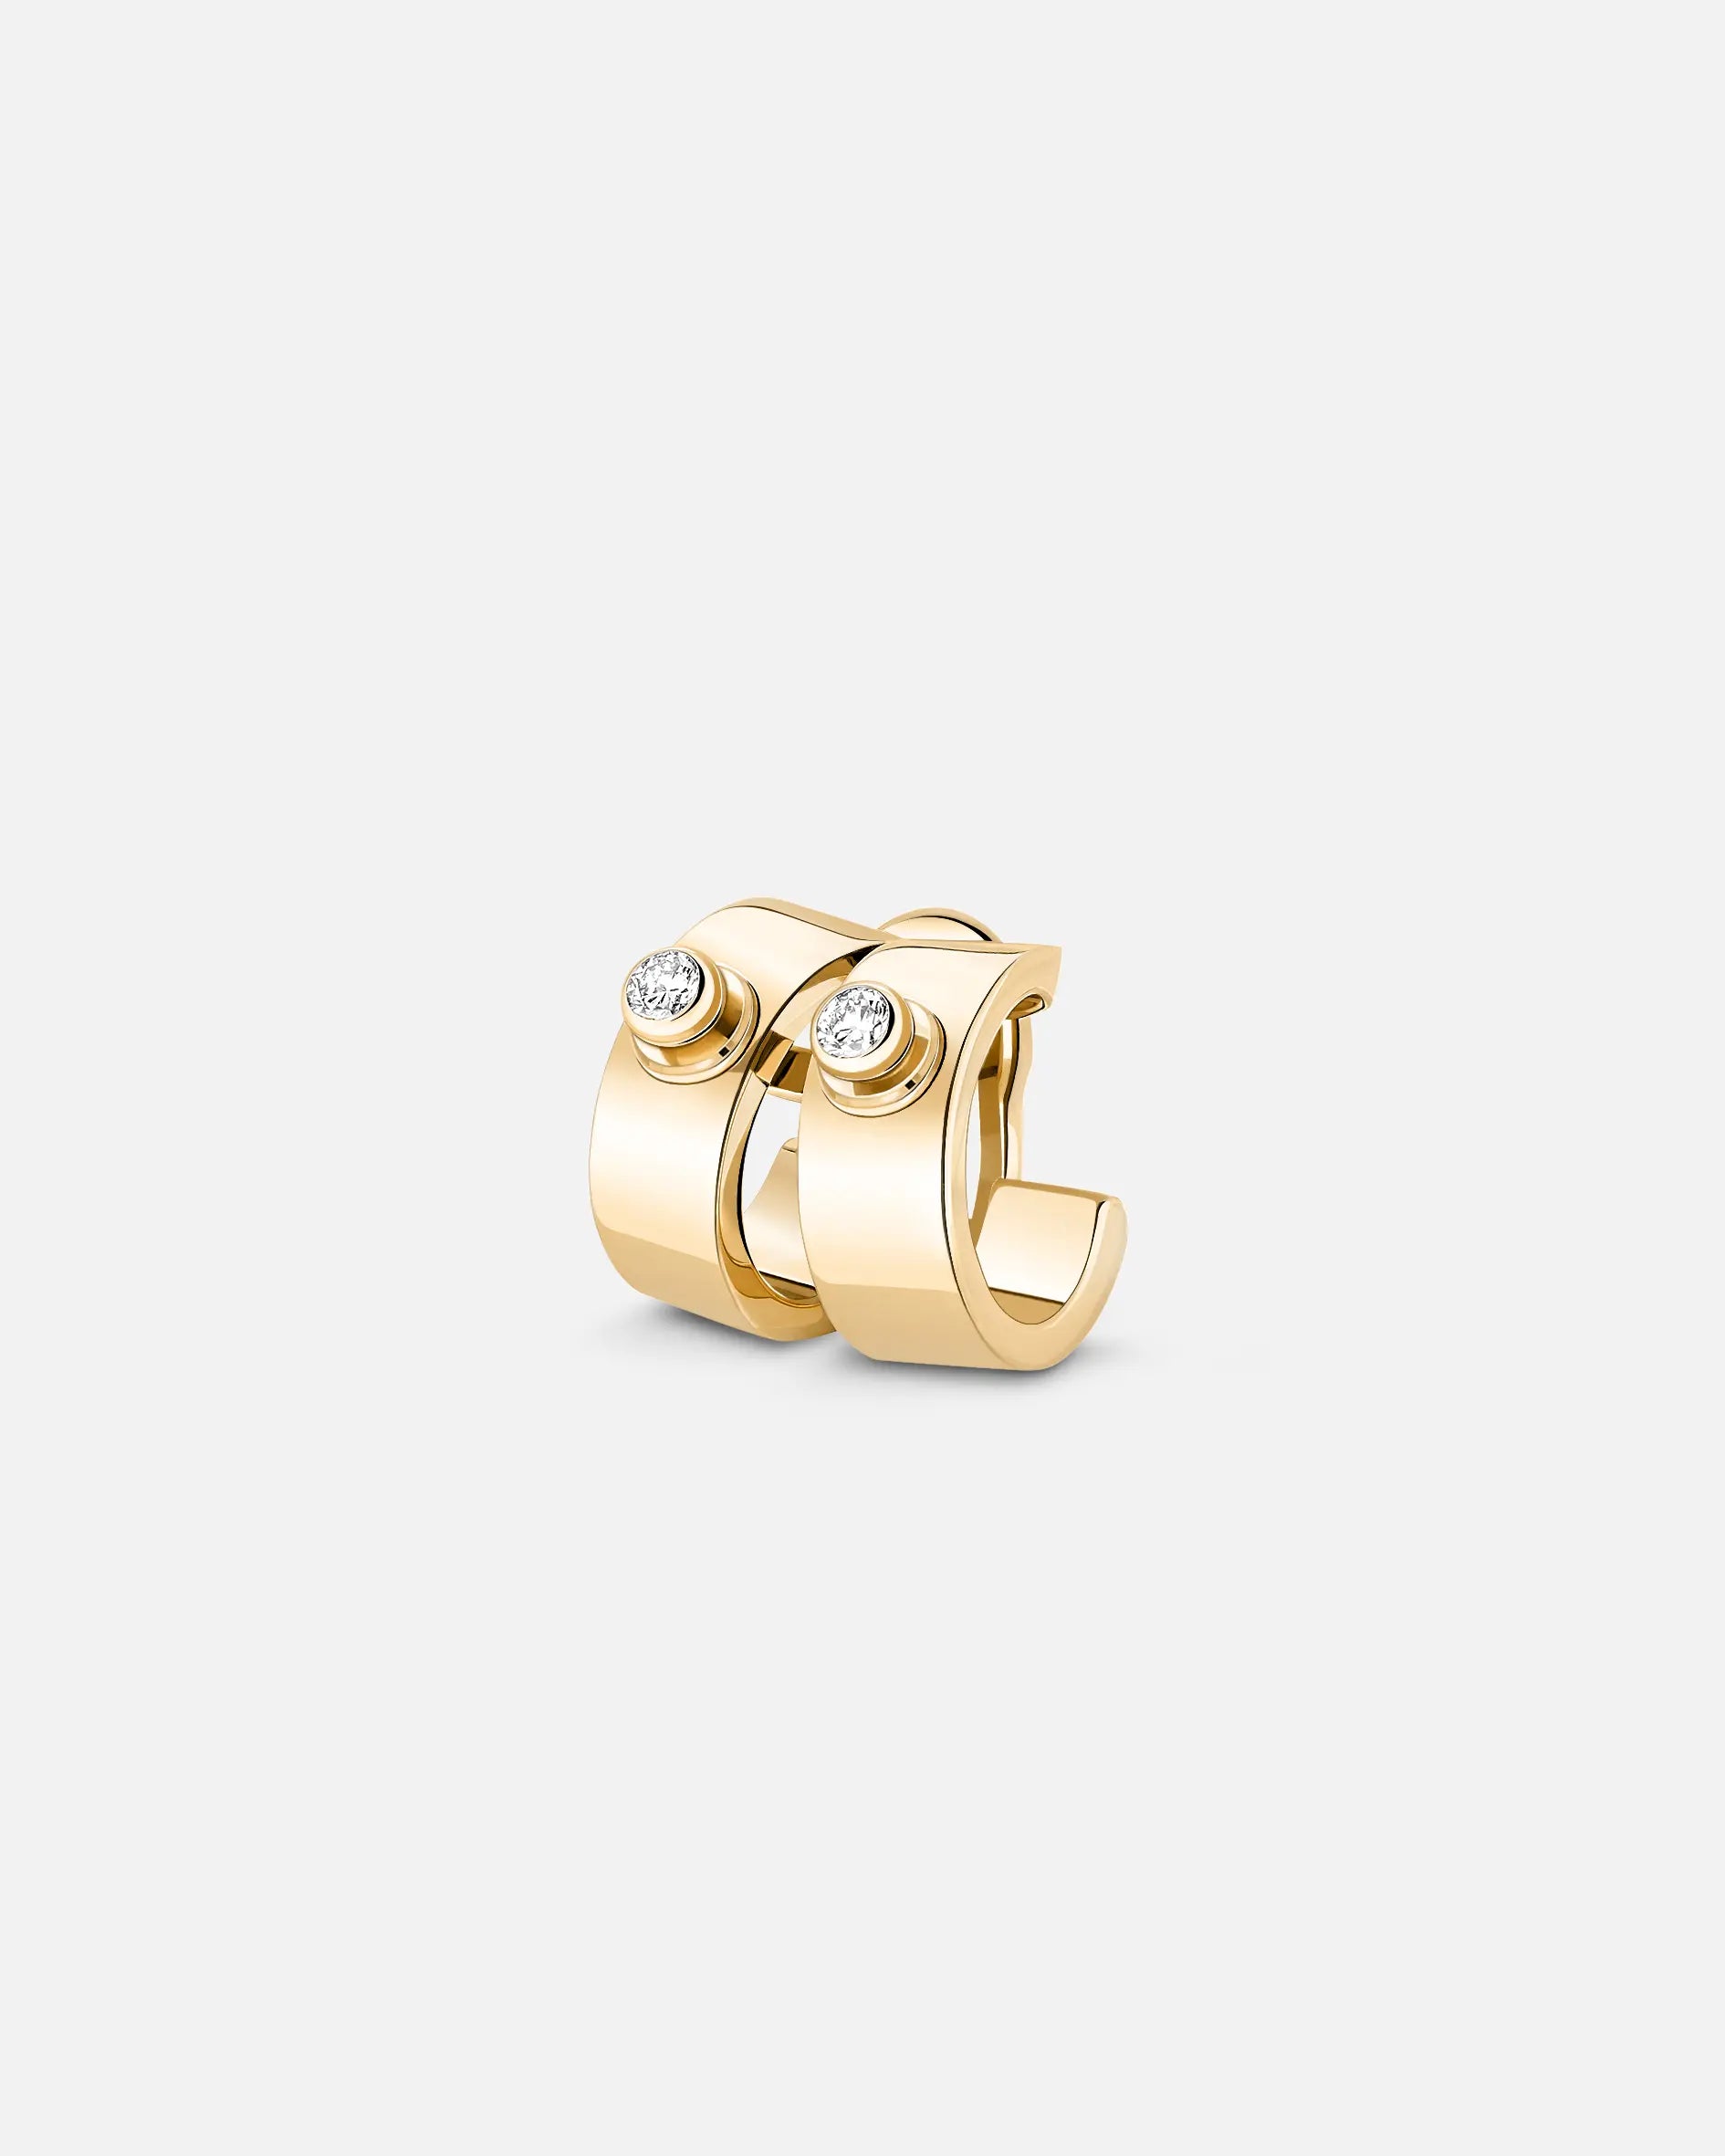 Monday Morning Ear Clip in Yellow Gold - 1 - Nouvel Heritage